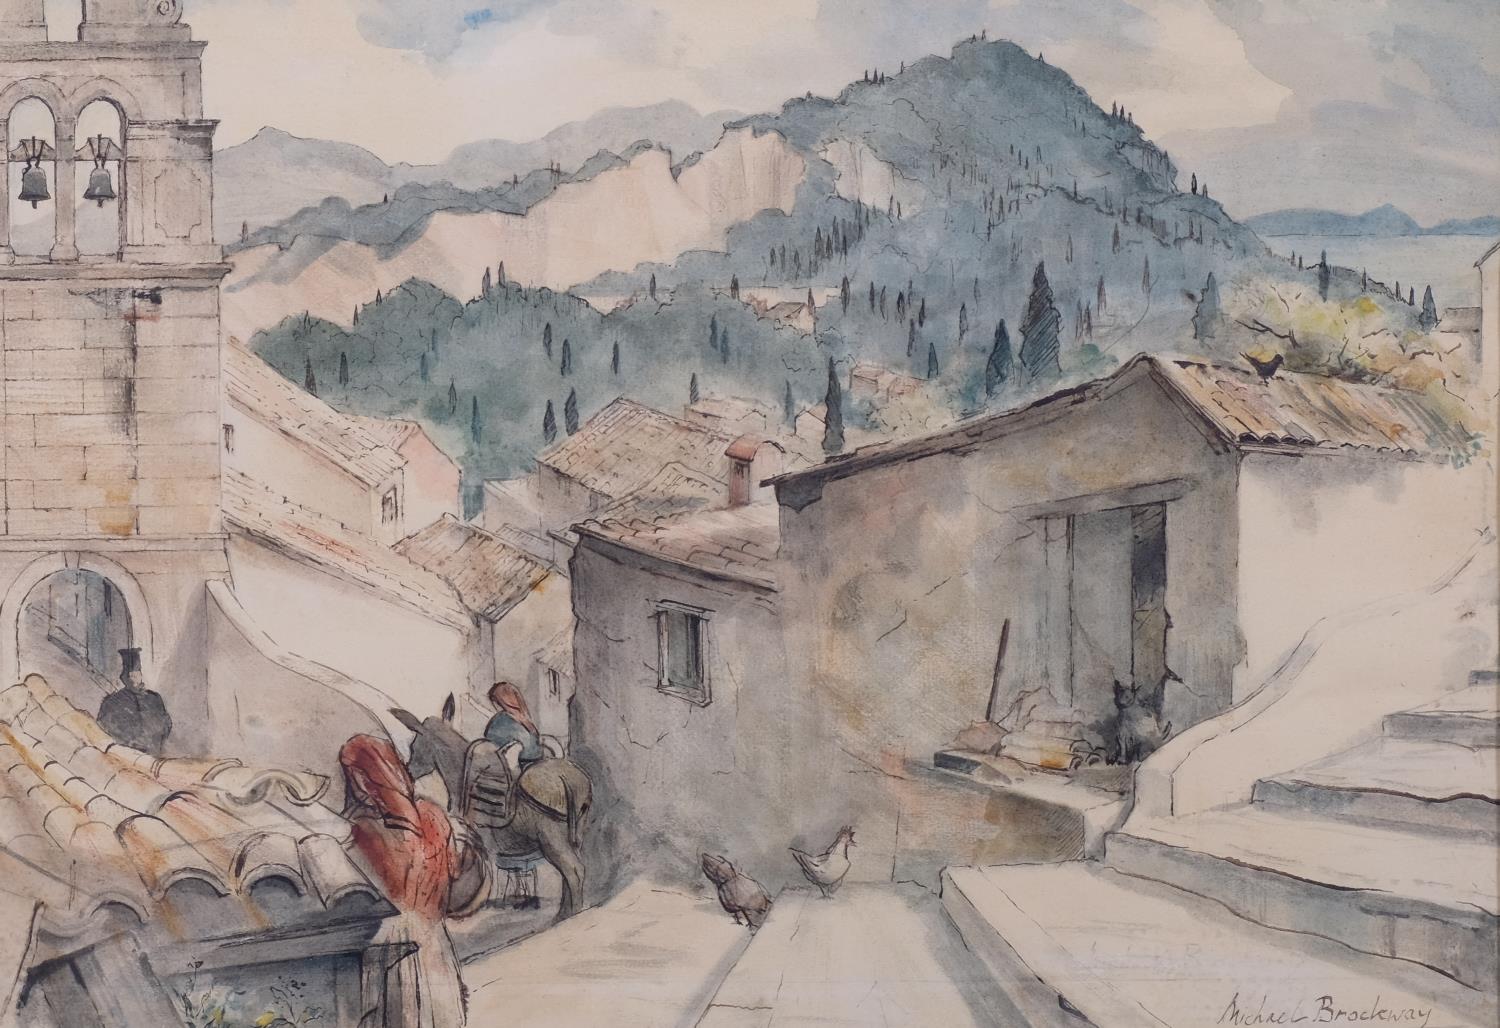 Michael Brockway, Kato Garounas, watercolour, signed with exhibition label verso dated 1979, 31cm